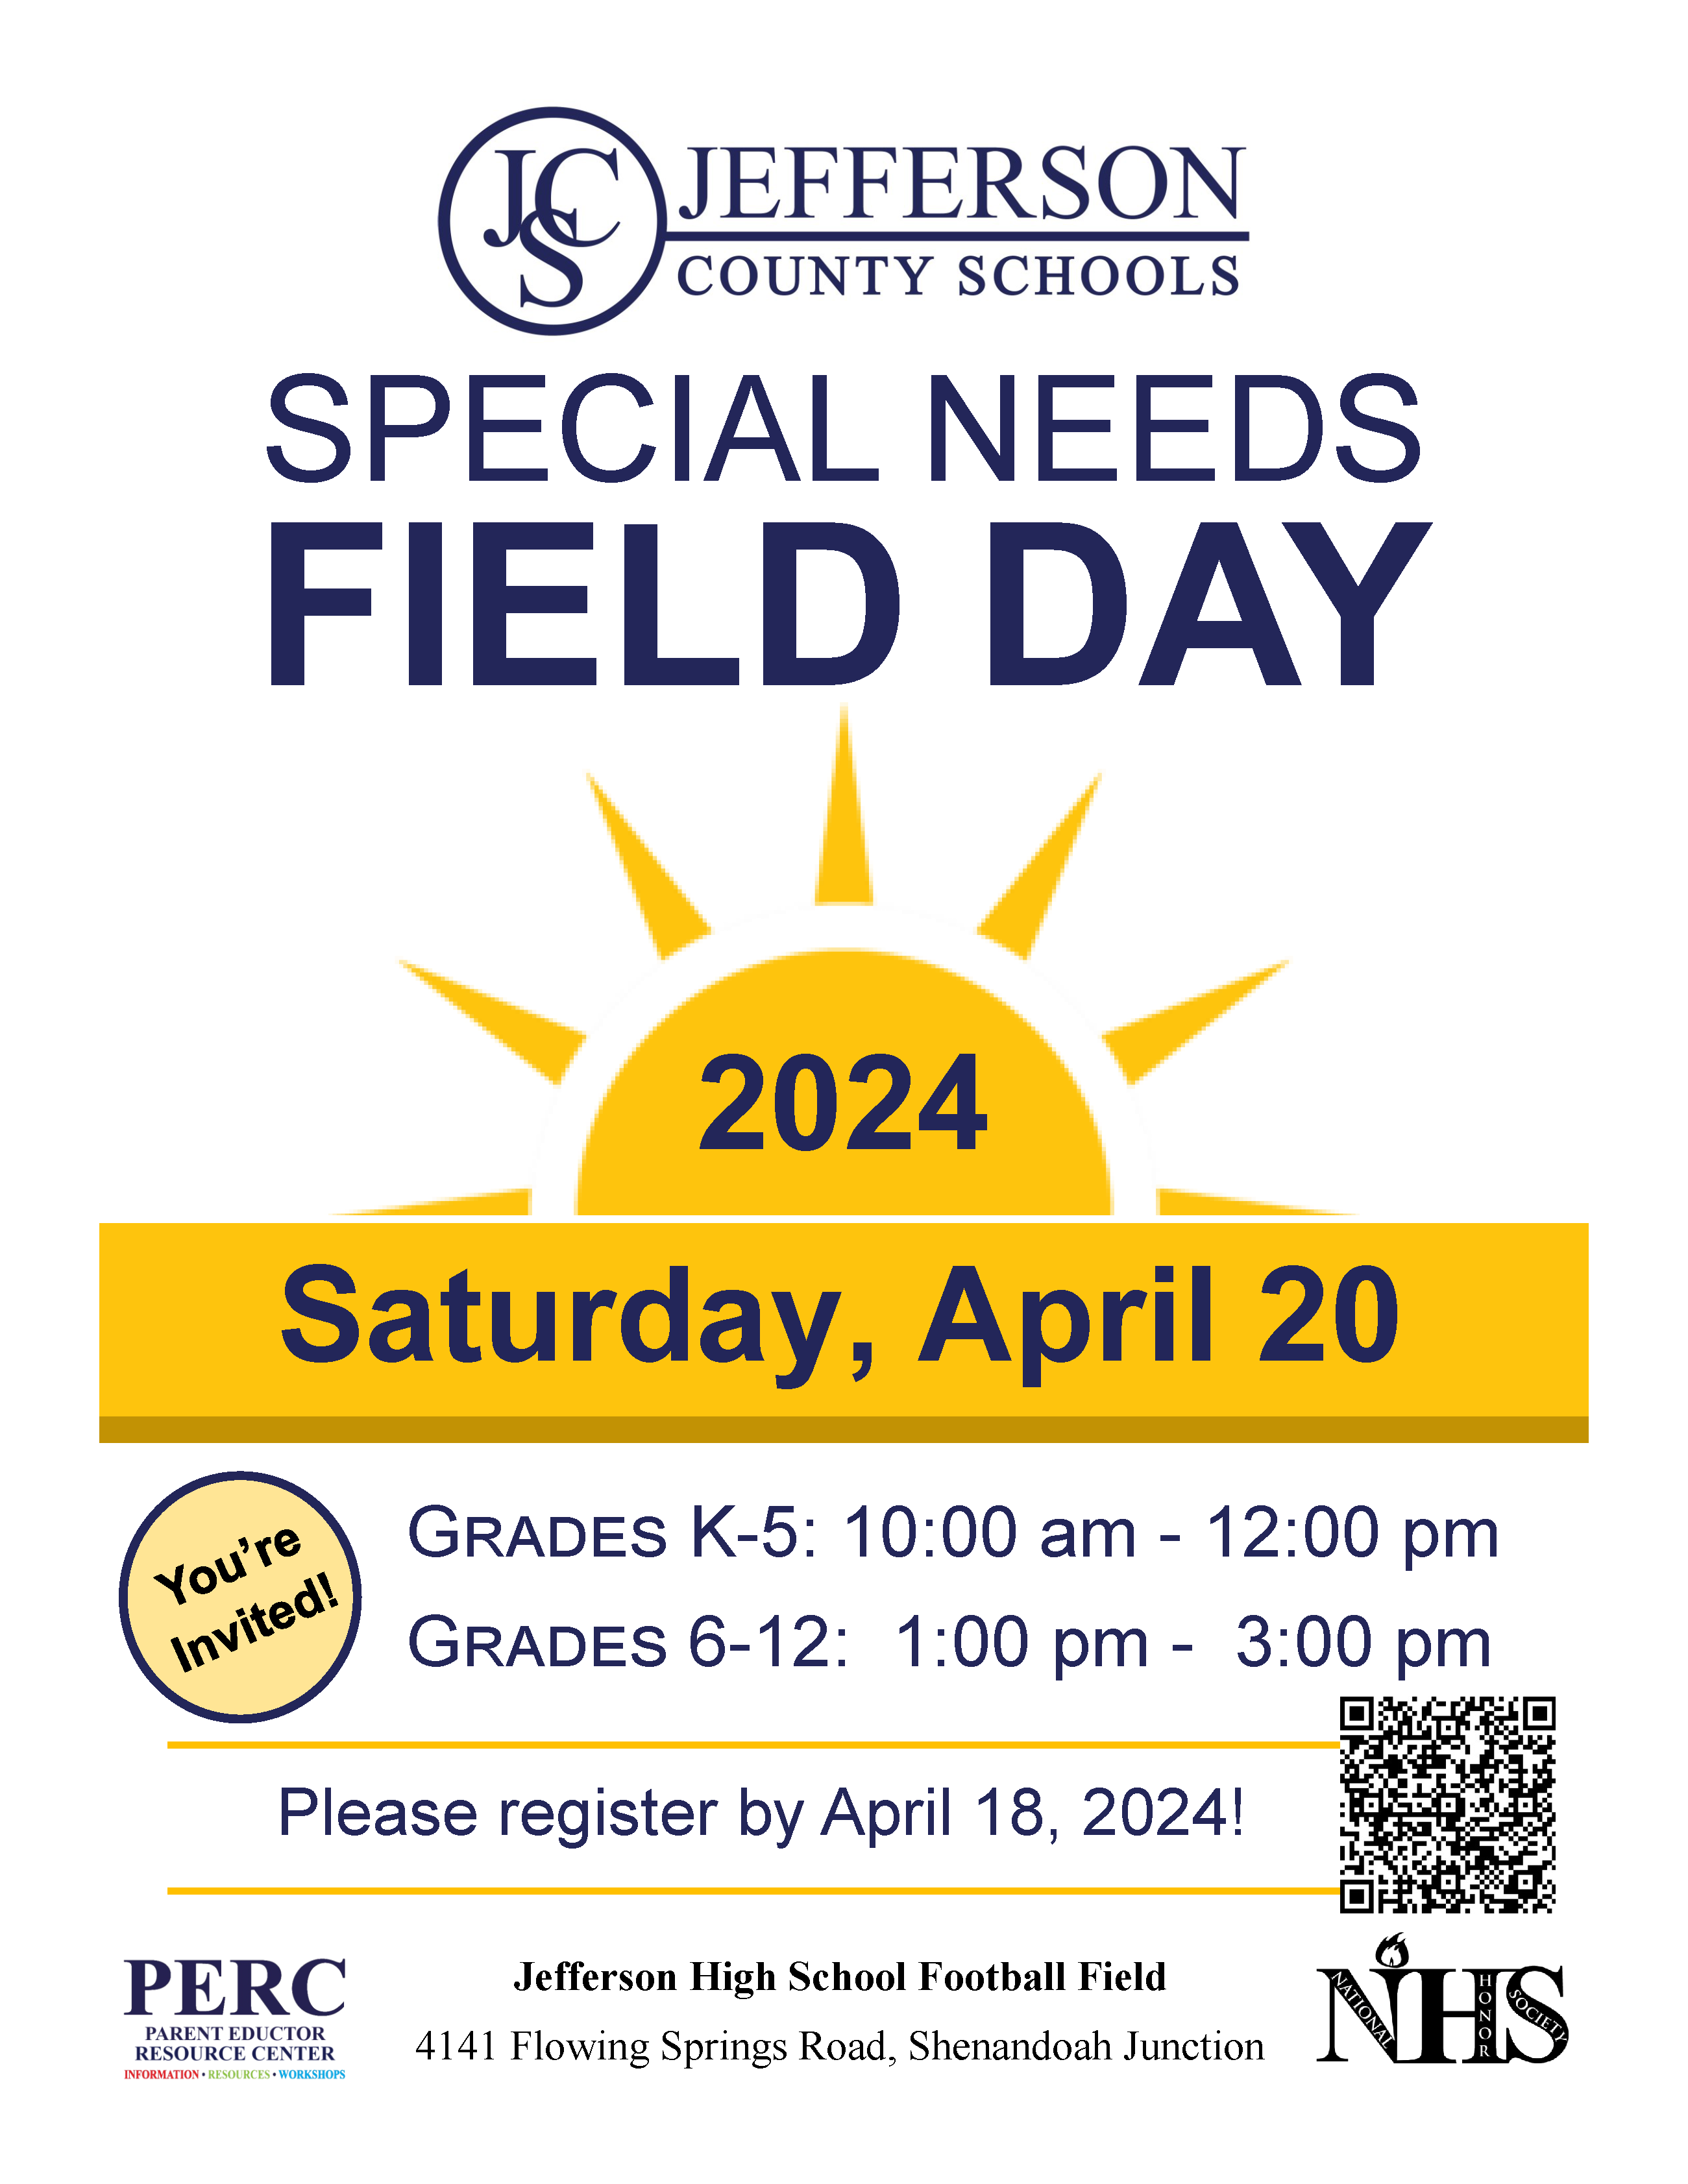 JCS special Needs Field Day